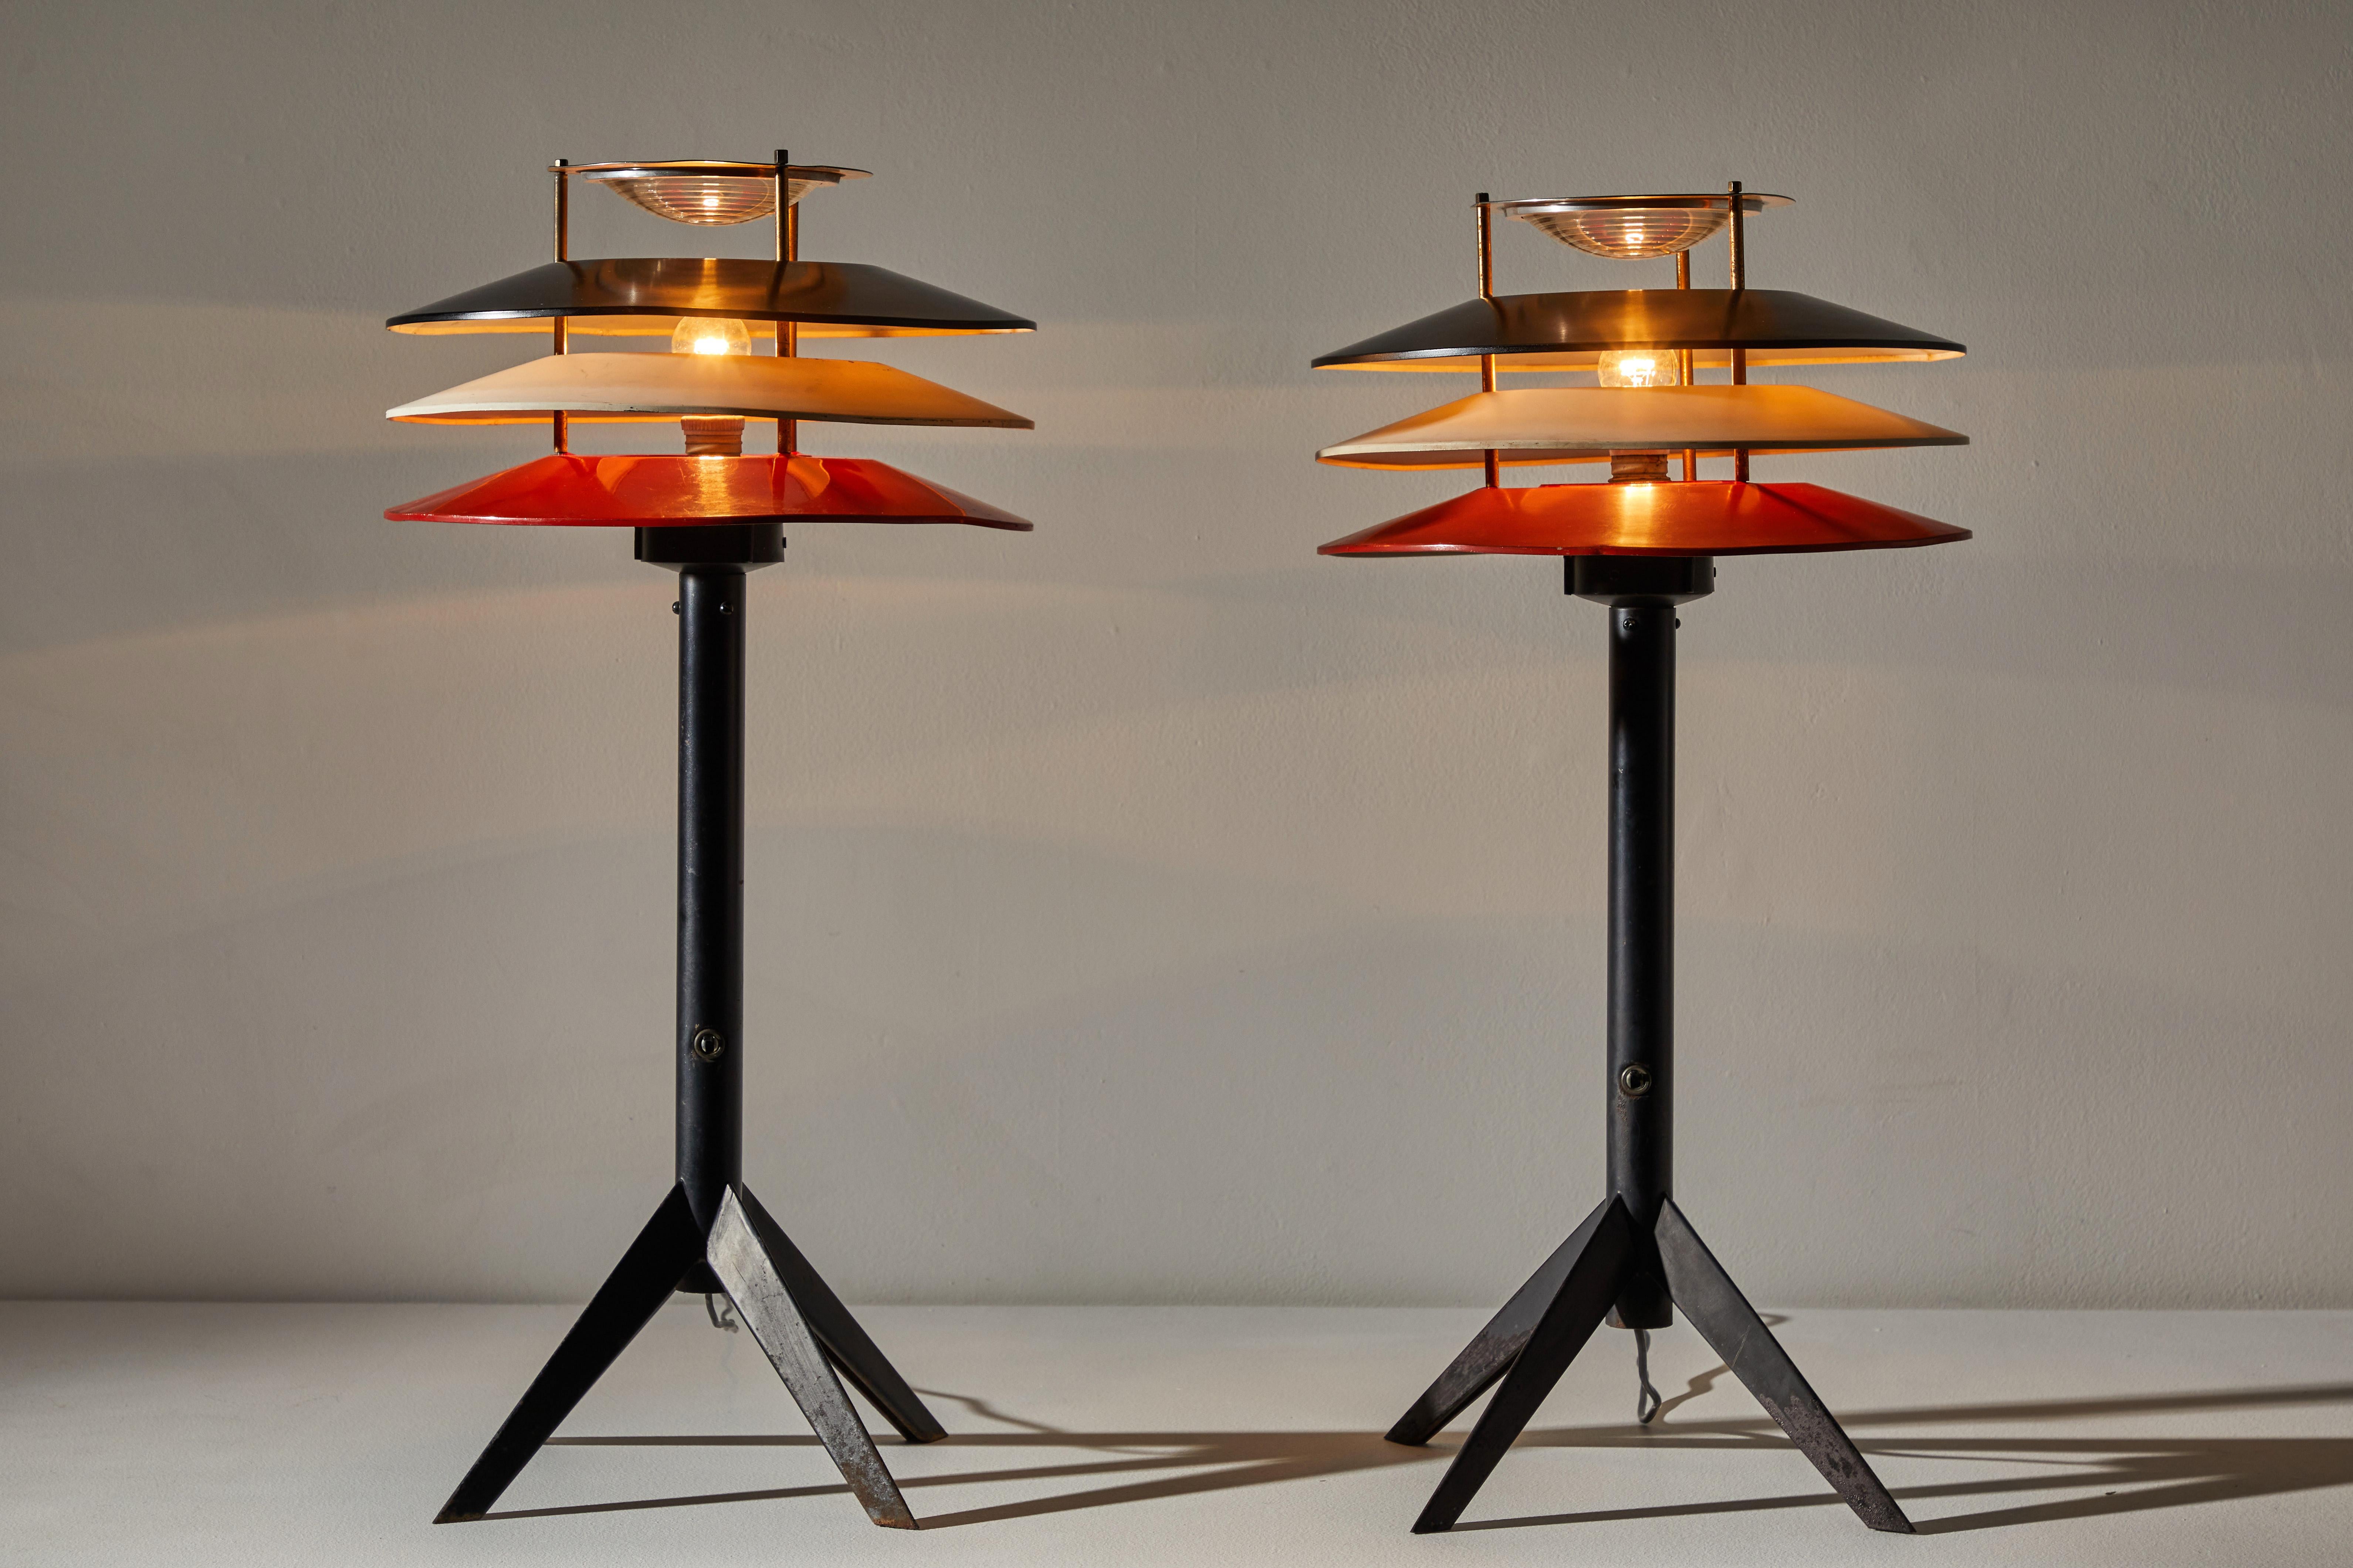 Pair of rare Stilnovo table lamps. Manufactured in Italy, circa 1950s. Enameled metal, brass, glass diffuser. Original cord. Each light takes one E27 100w maximum bulb. Bulbs provided as a one time courtesy. Light retains the original manufacturer's